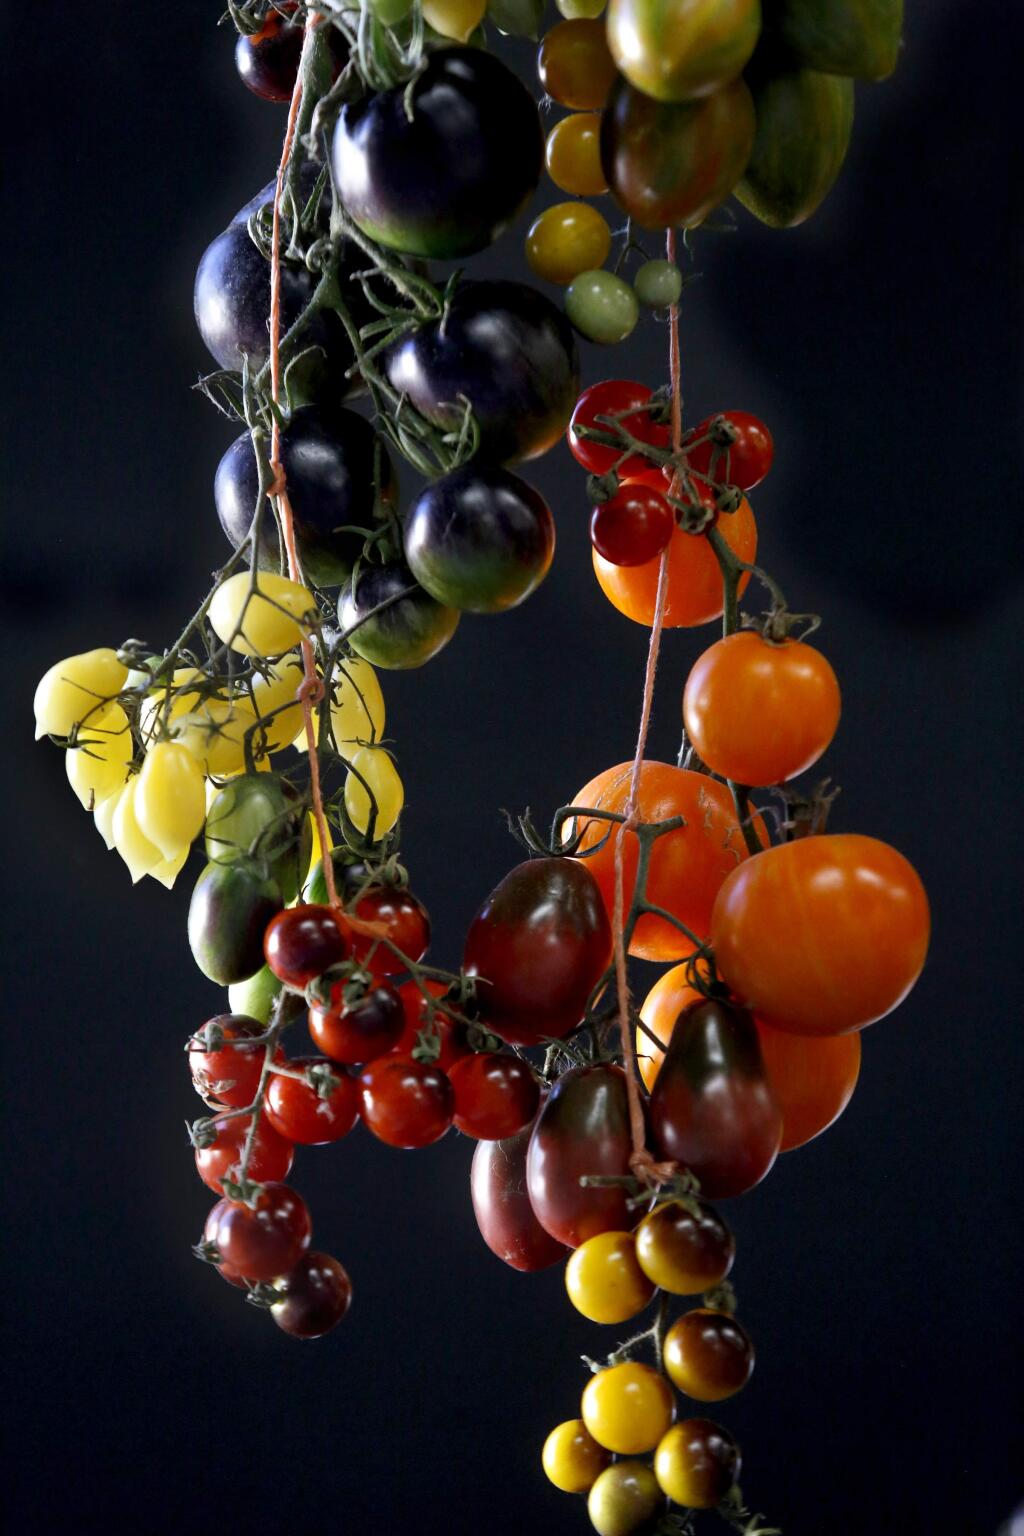 A variety of tomatoes from Wild Boar Farms hang on display during the National Heirloom Expo at the Sonoma County Fairgrounds in Santa Rosa on Tuesday, September 11, 2018. (Beth Schlanker/ The Press Democrat)